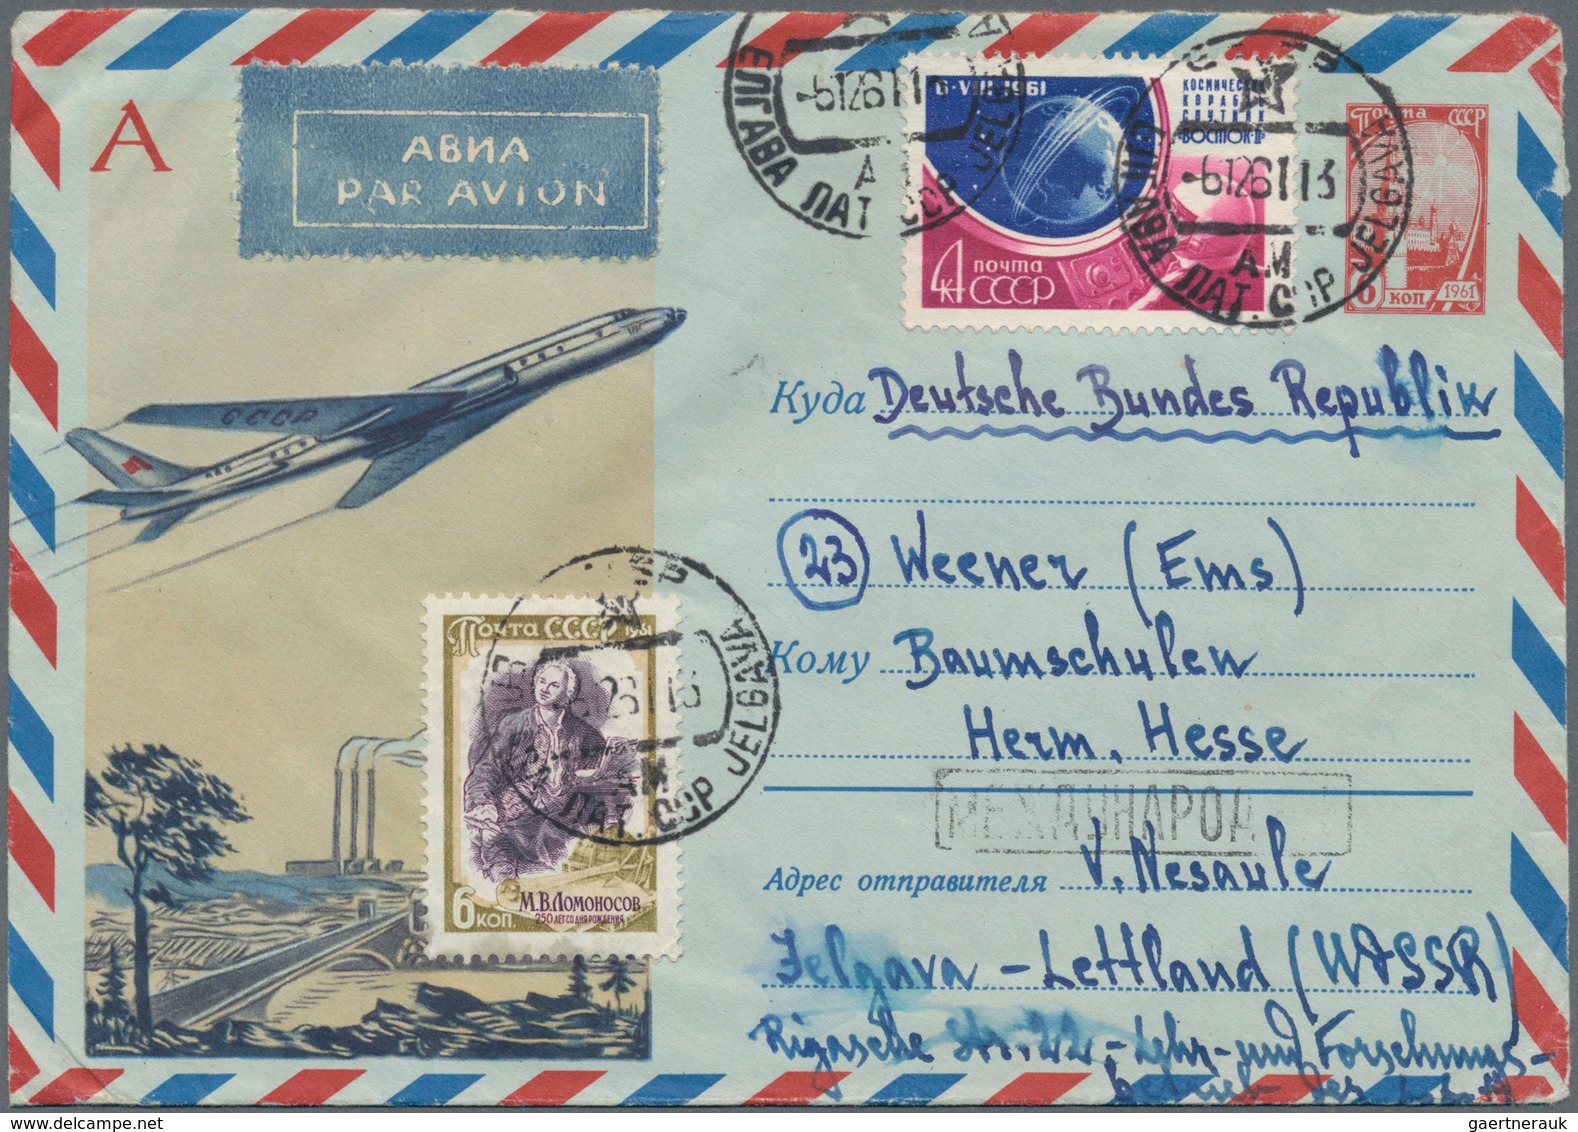 24831 Flugpost Alle Welt: 1900/2000, huge collection of international airmail covers in over 100 albums, i